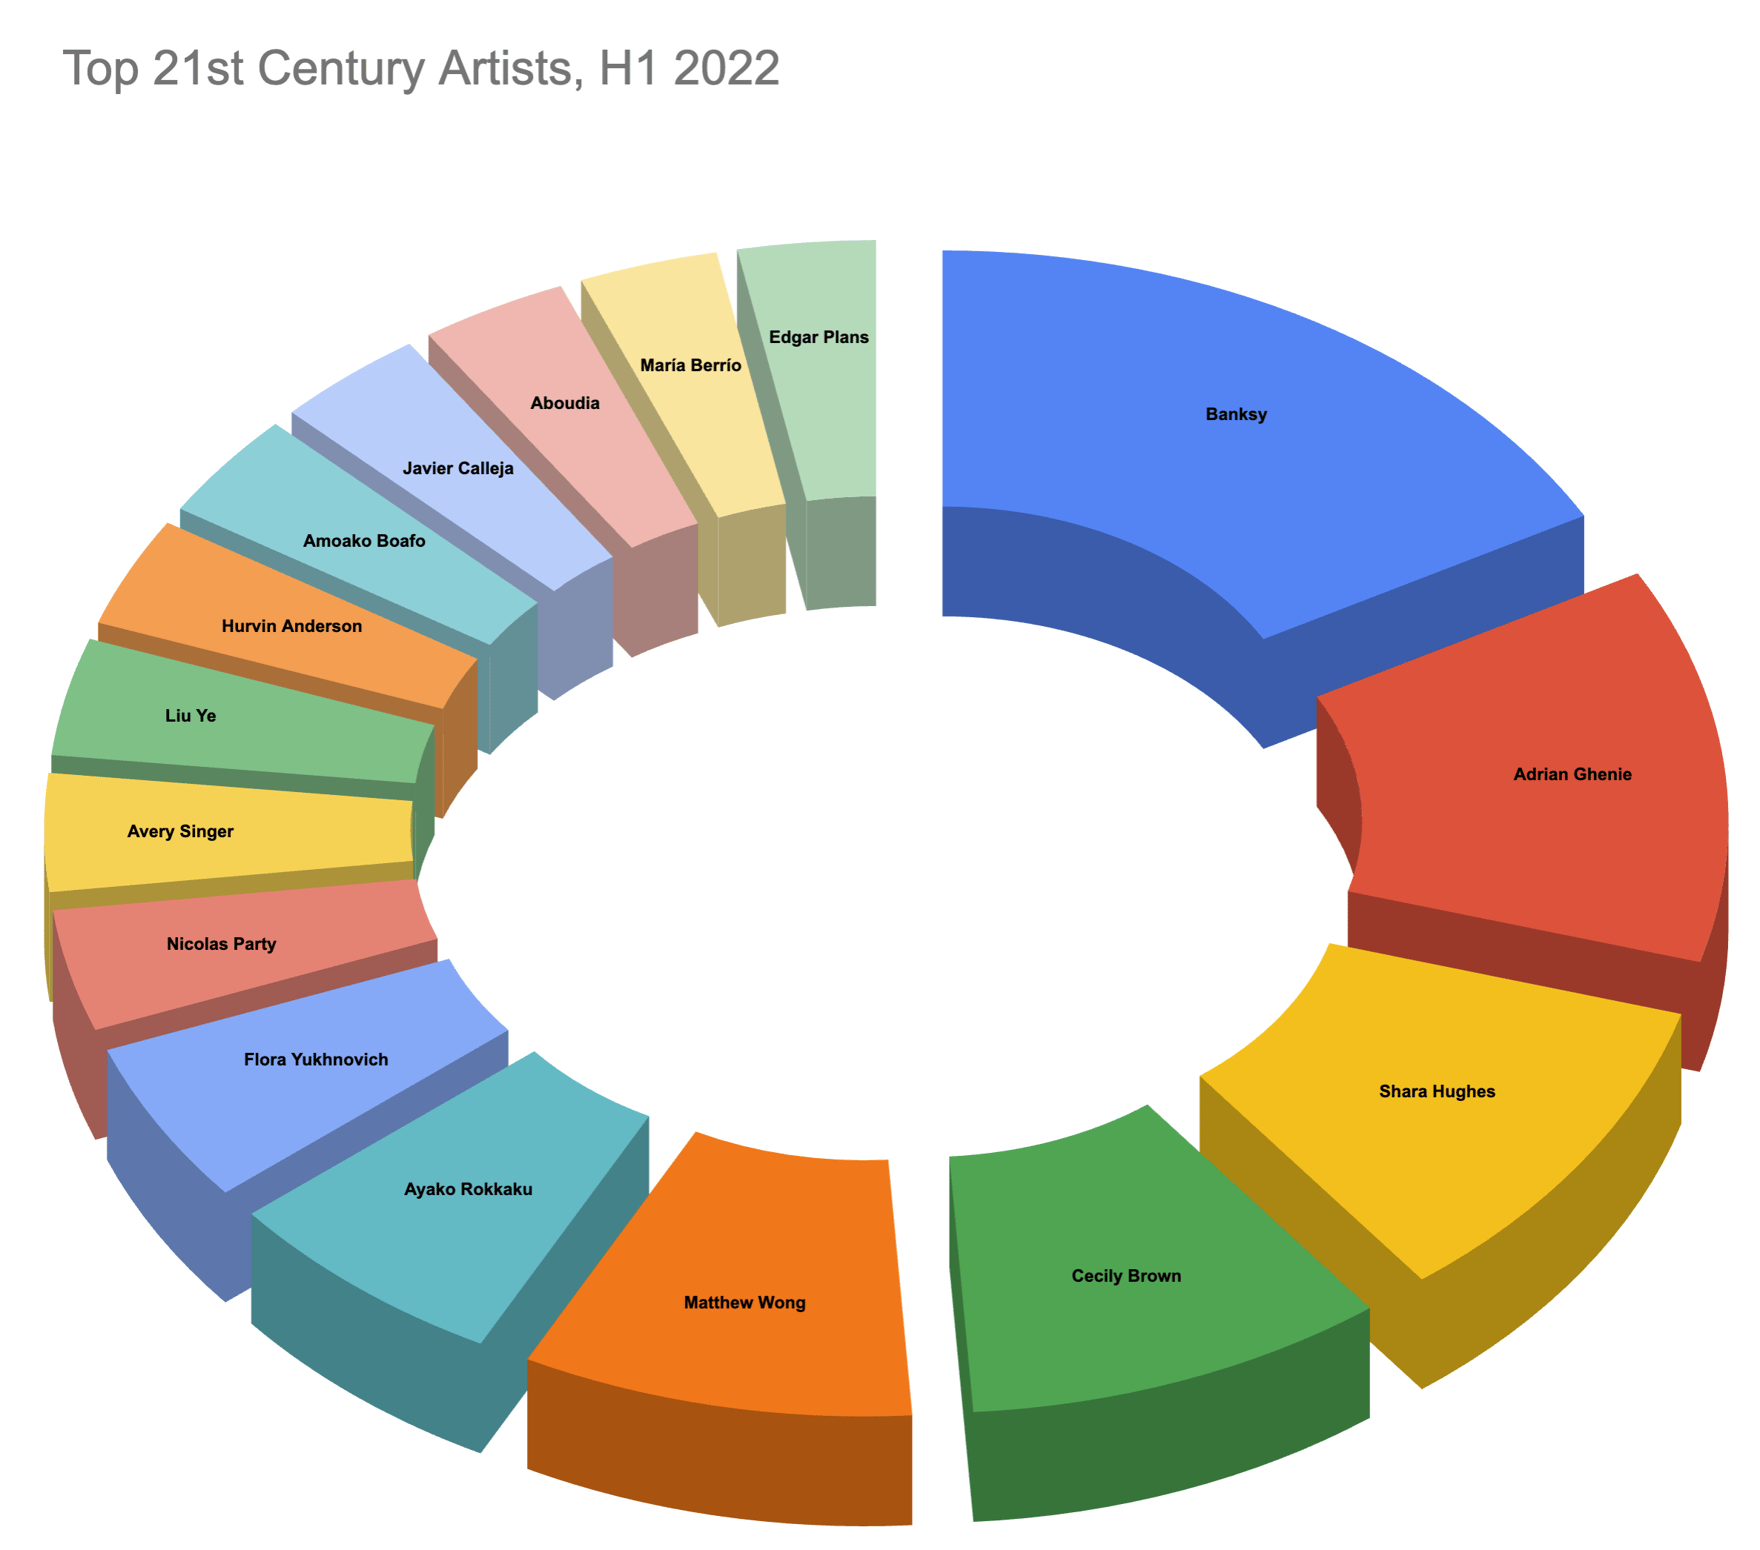 The Top 20 Artists from the 21st Century